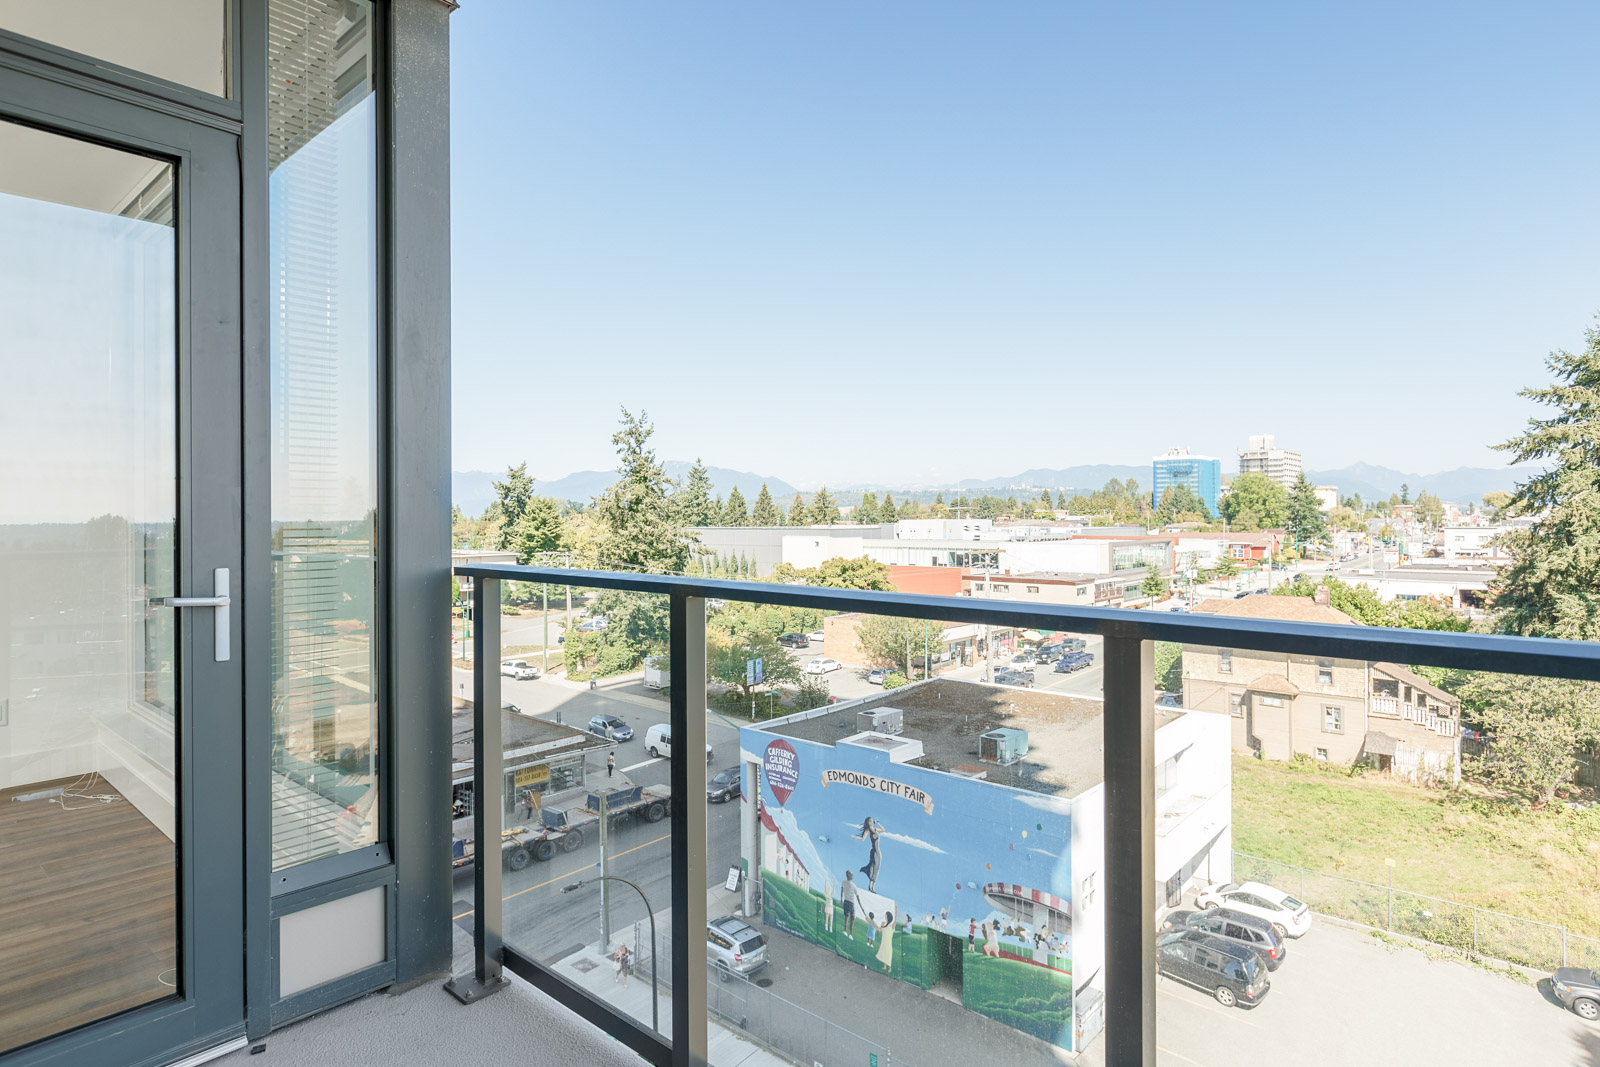 Condo balcony with view in Kings Crossing condo rental property in Highgate village and Edmonds neighbourhood in Burnaby